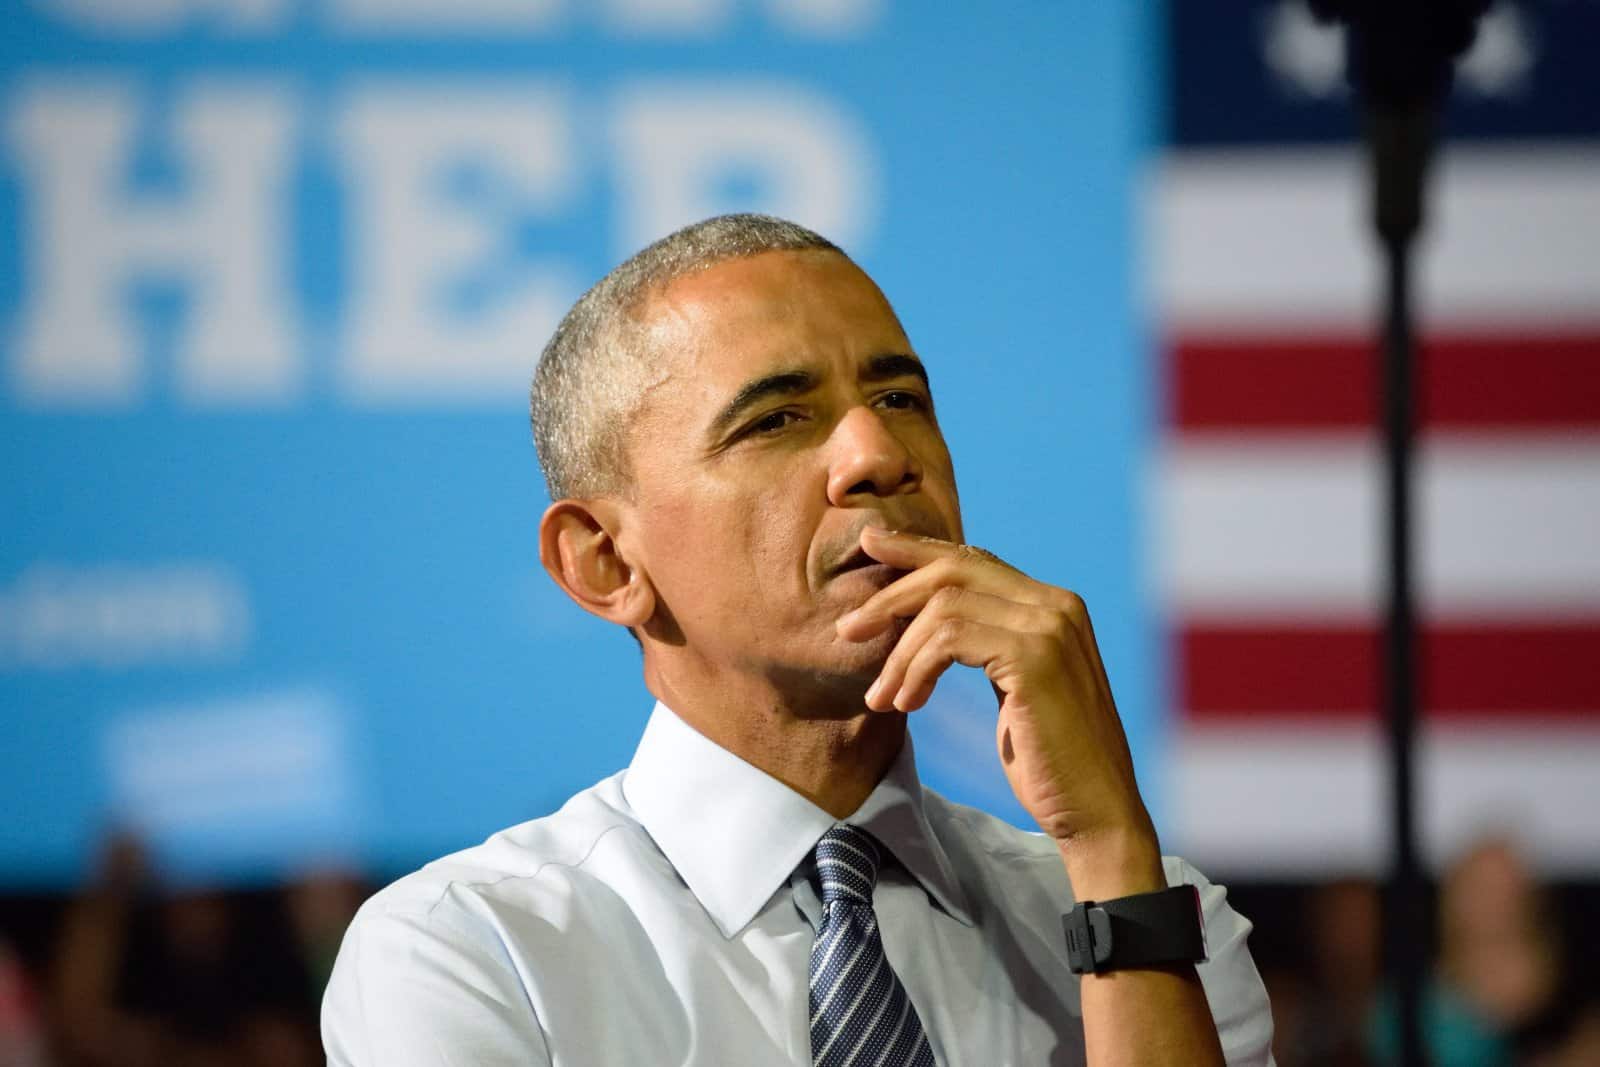 Image Credit: Shutterstock / Evan El-Amin <p><span>Barack Obama’s 2008 campaign slogan inspired many but has since been diluted through overuse in various campaigns and advertisements, losing its original impact.</span></p>